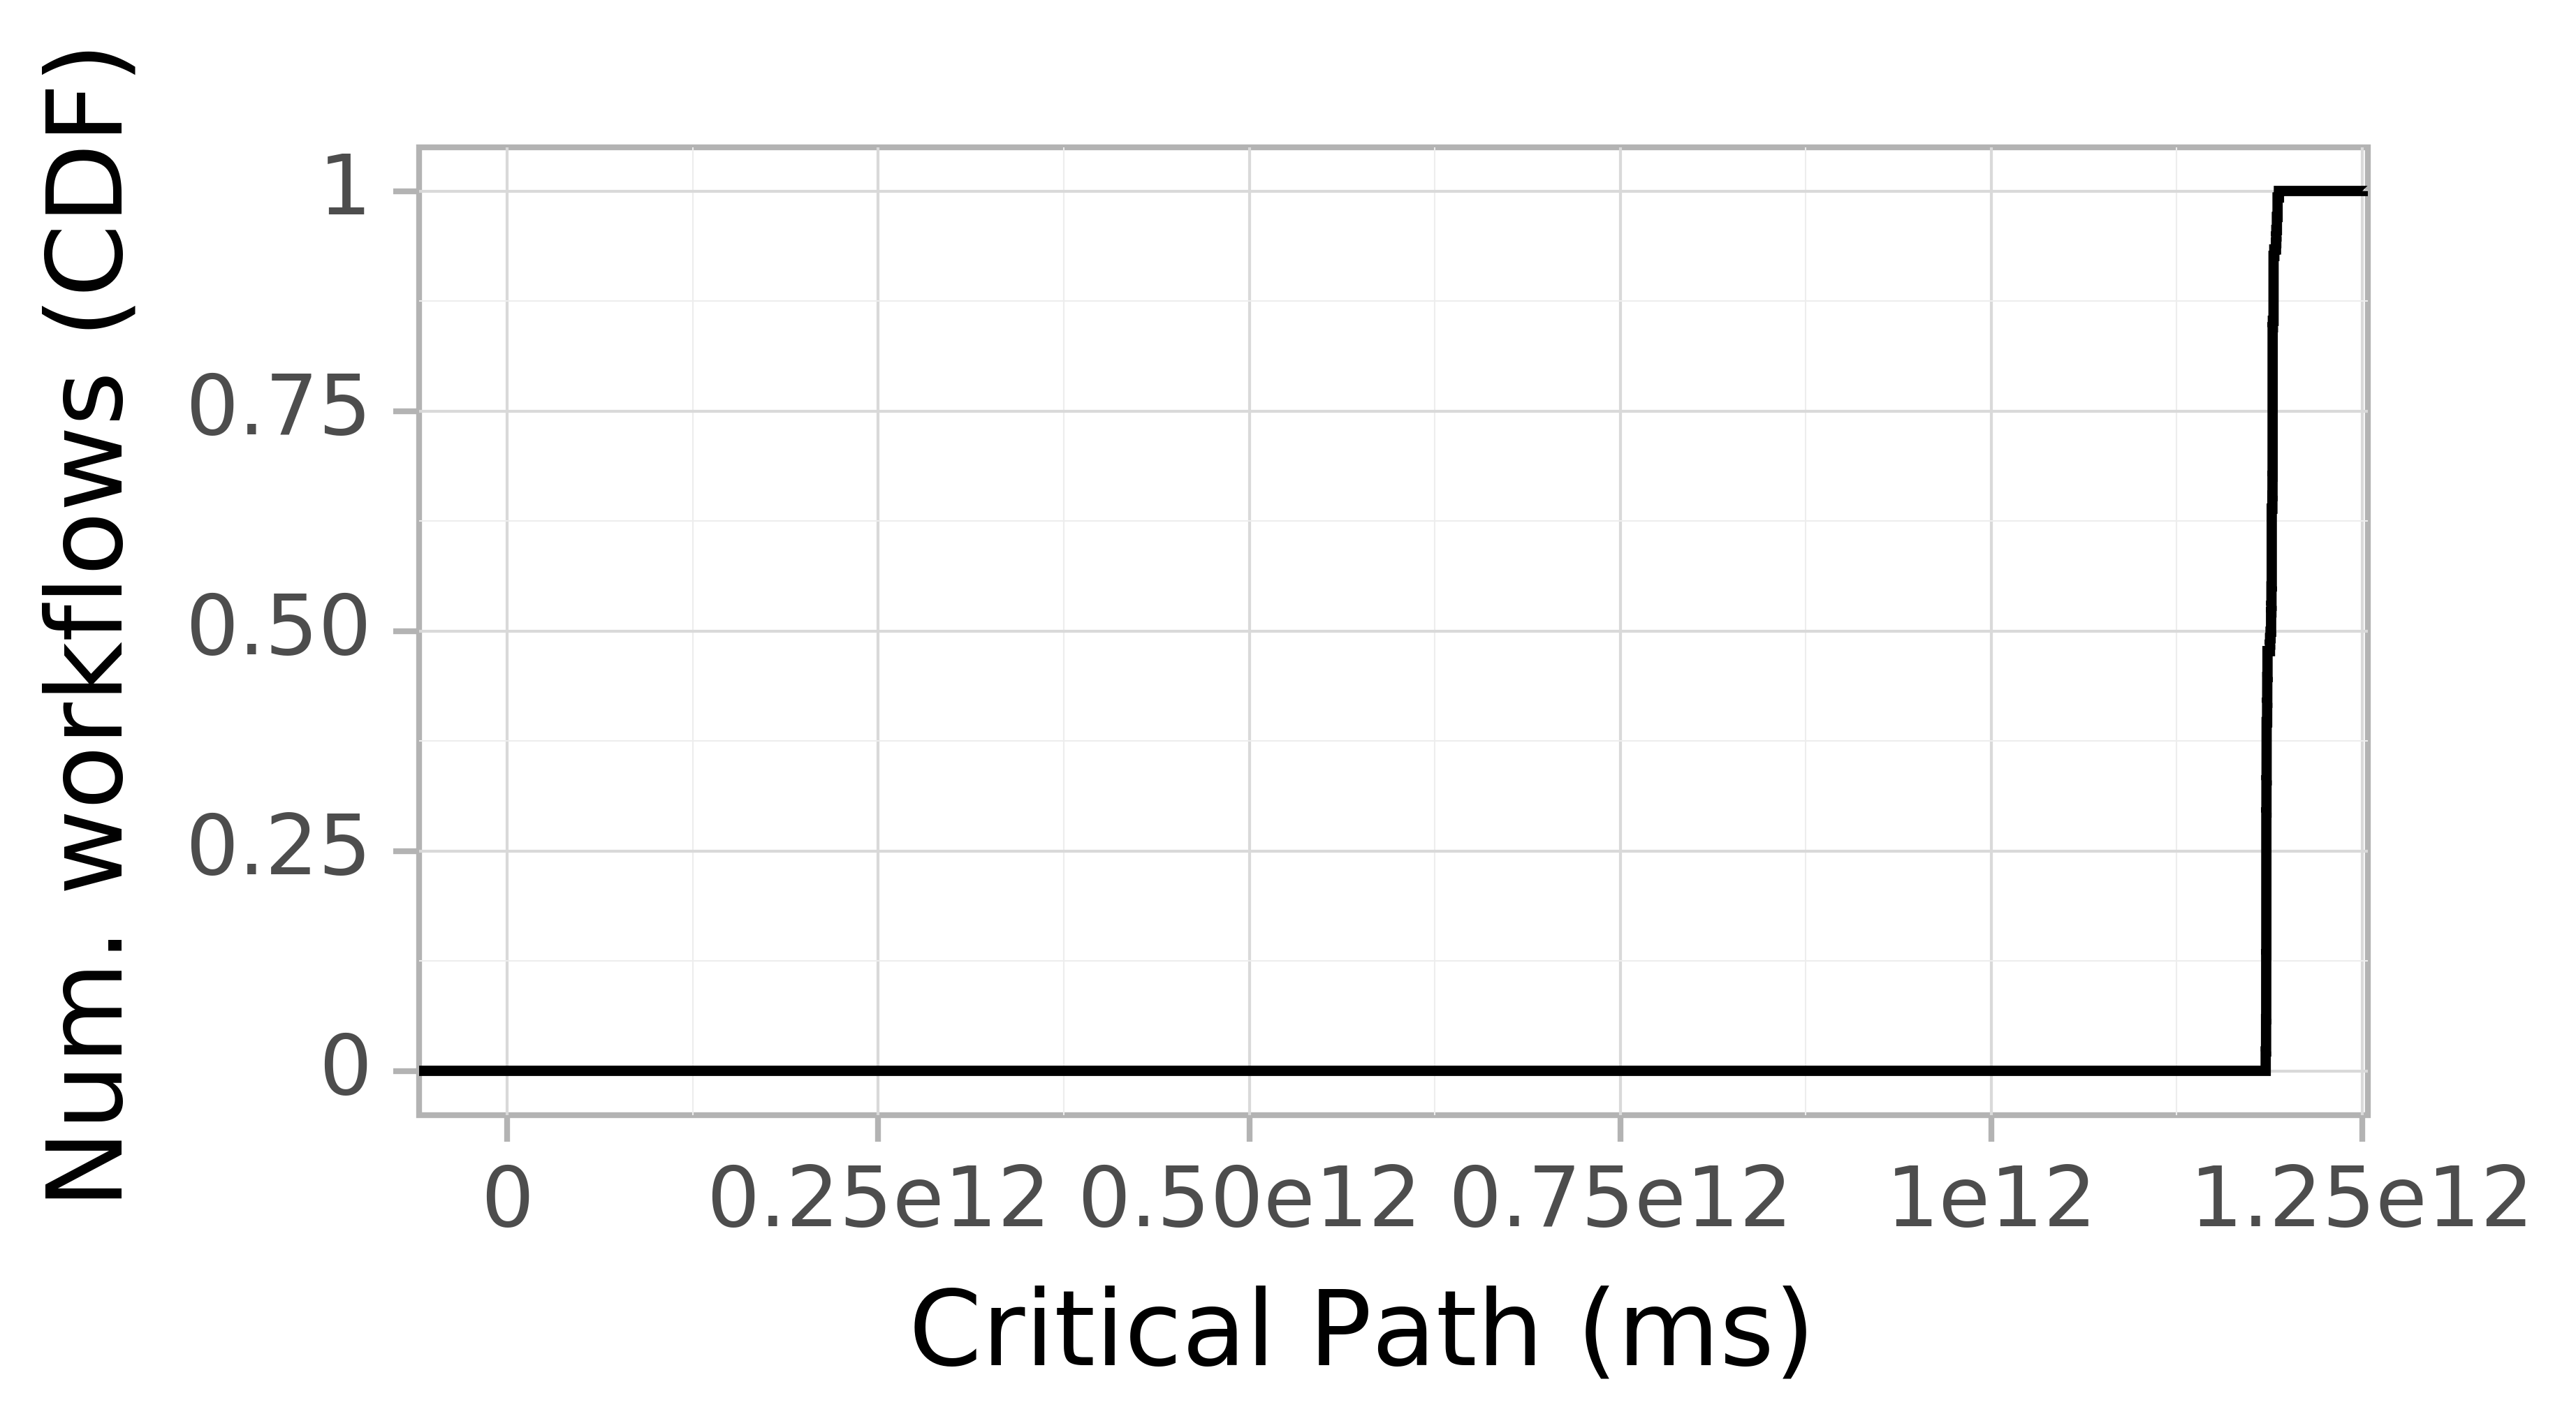 Job runtime CDF graph for the askalon_ee2 trace.